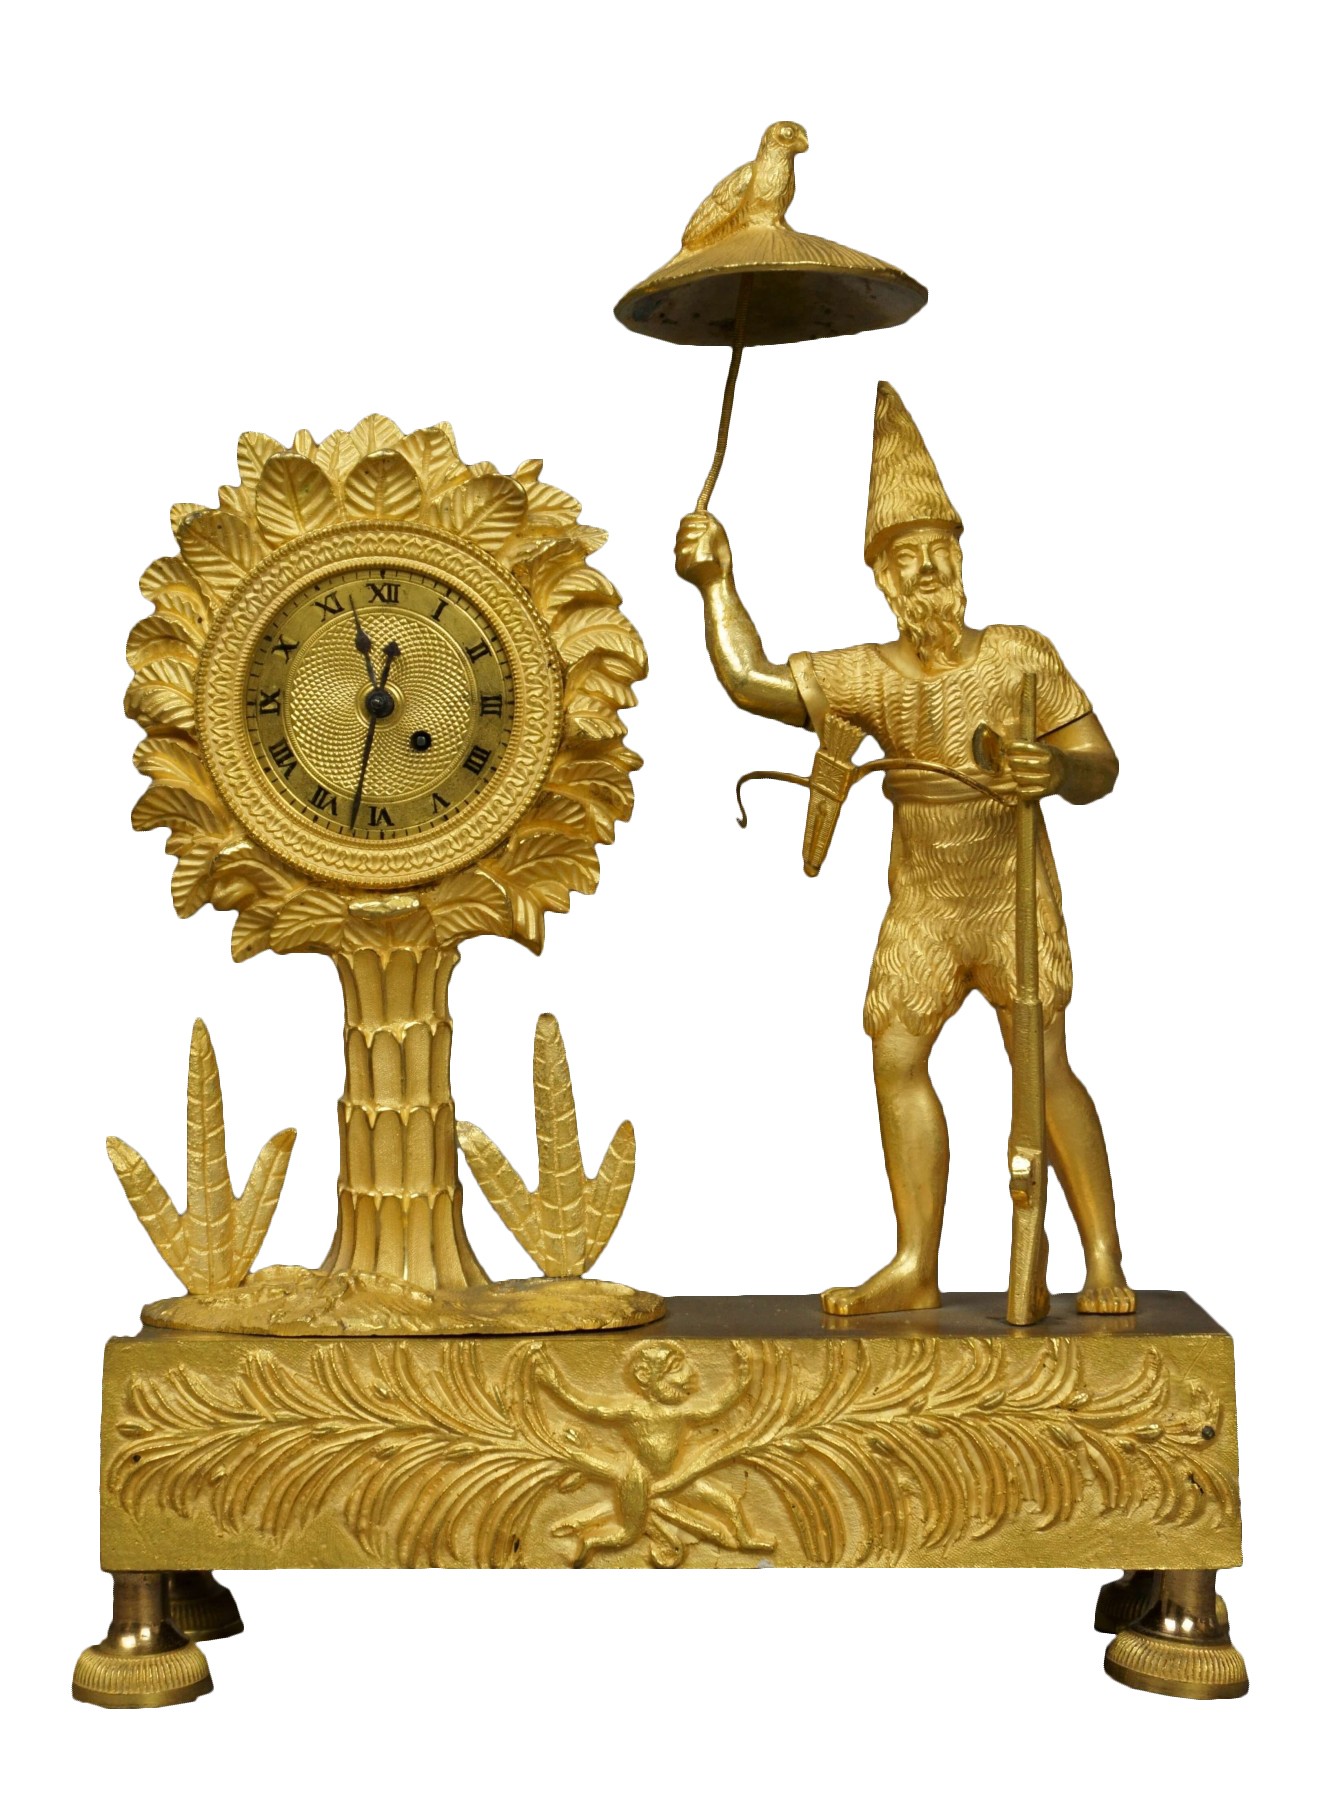 Au Bon Sauvage Series Ormolu Gilt Bronze Empire Mantel Clock Lepine Ref 80223 Check out our ormolu clock selection for the very best in unique or custom, handmade pieces from our home decor shops. au bon sauvage series ormolu gilt bronze empire mantel clock lepine